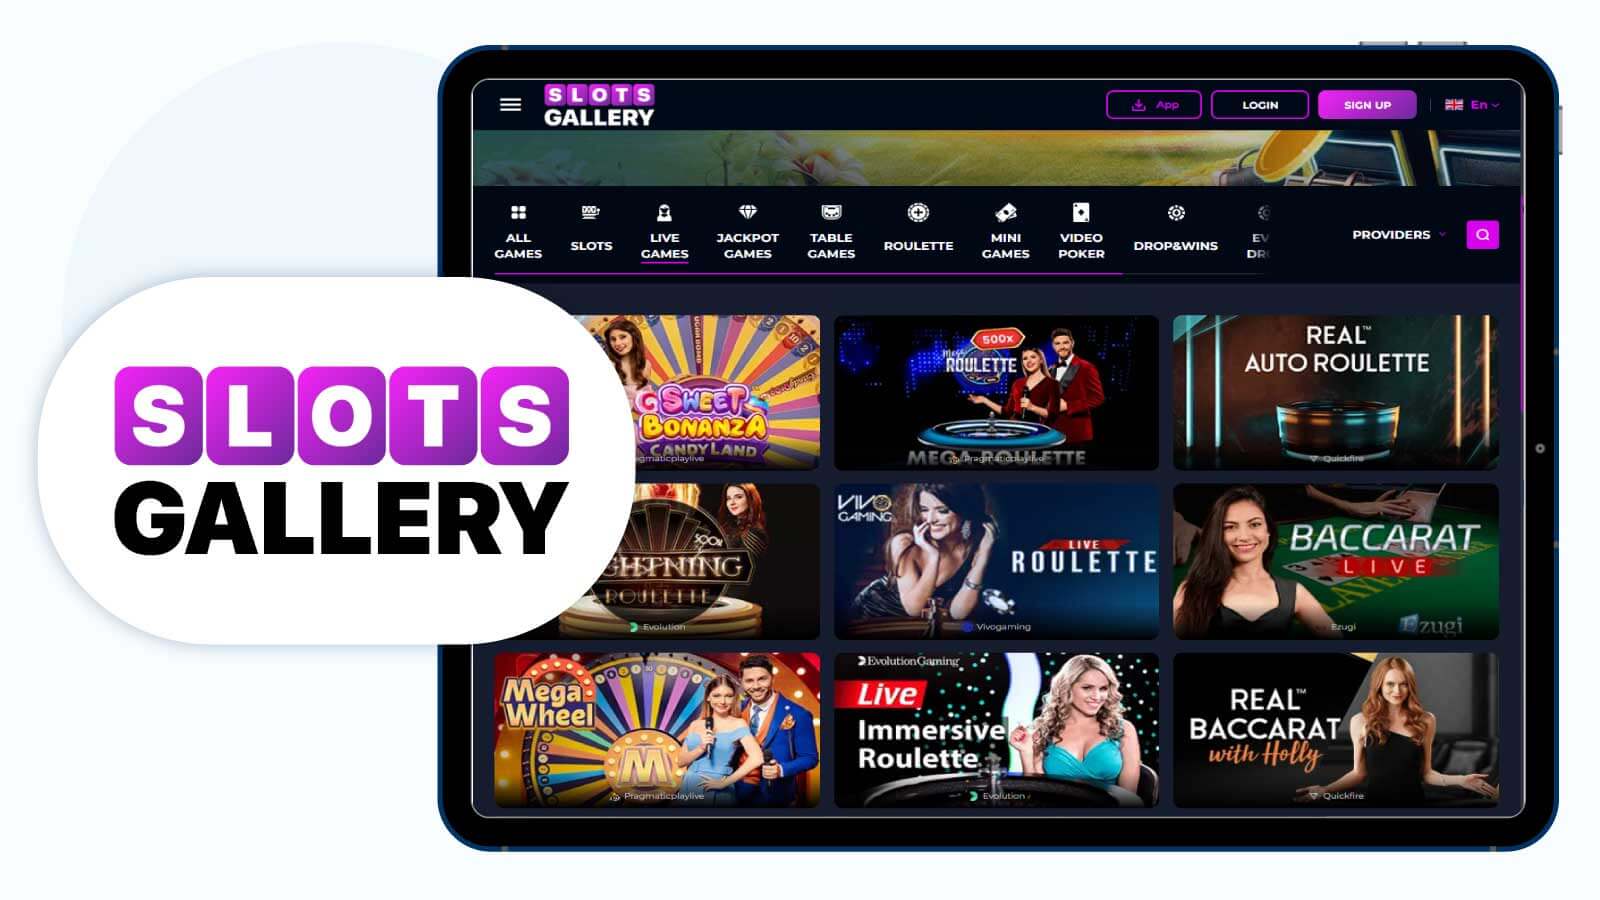 Slots Gallery Casino Discover Free Spins No deposit With High Maximum Cashout Cap